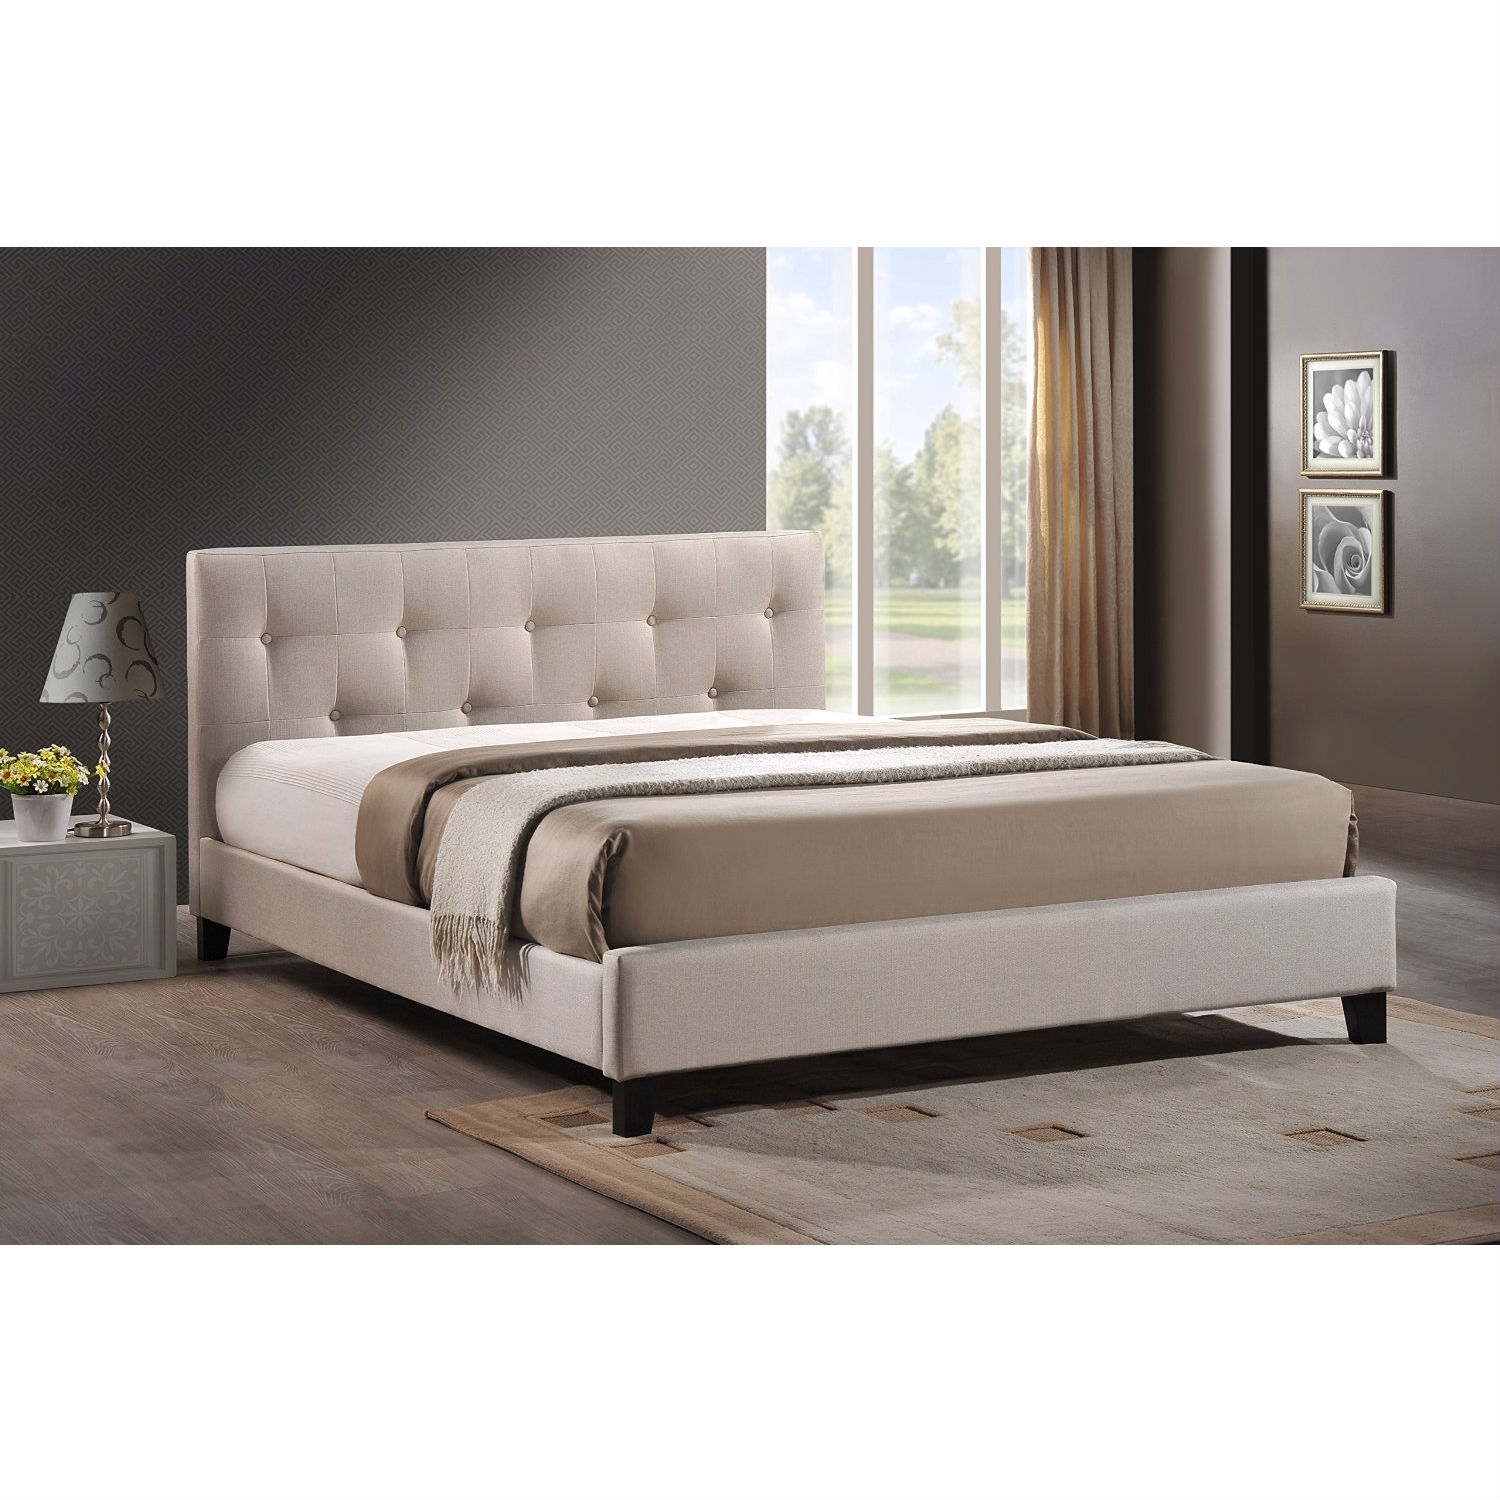 Queen size Beige Fabric Upholstered Platform Bed with Headboard